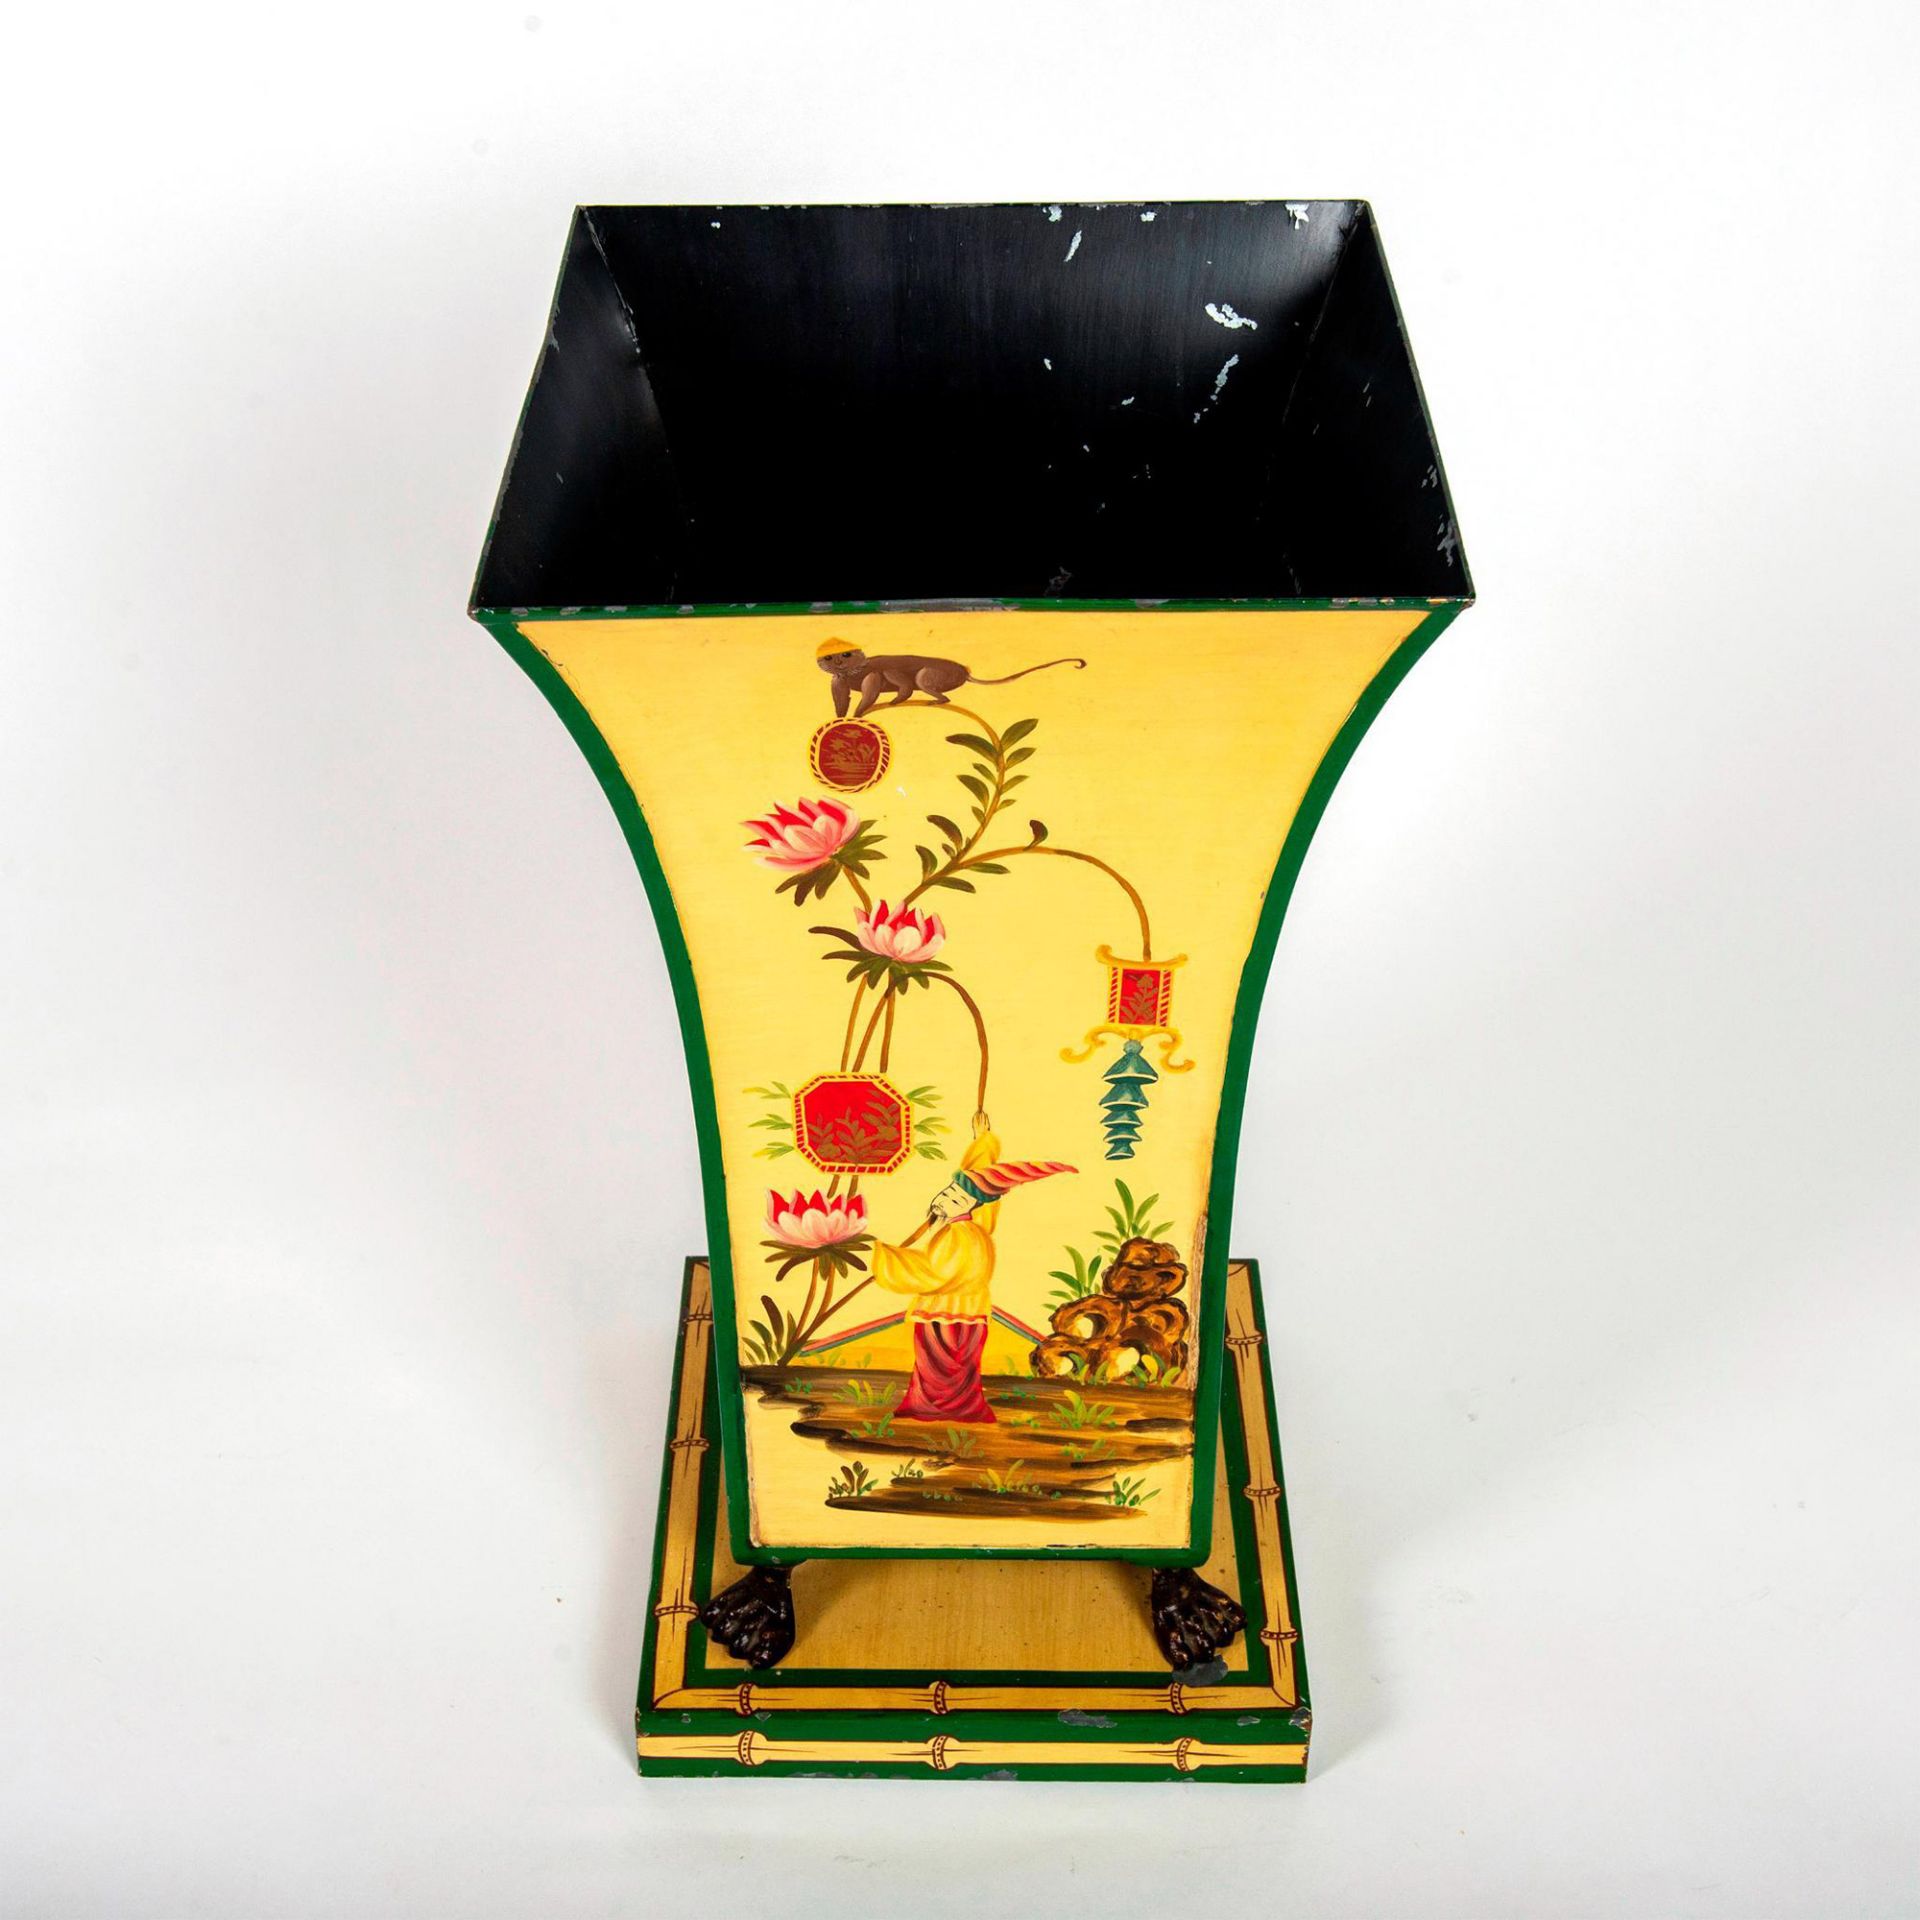 Vintage Chelsea House Metal Chinoiserie Umbrella Stand - Image 2 of 4